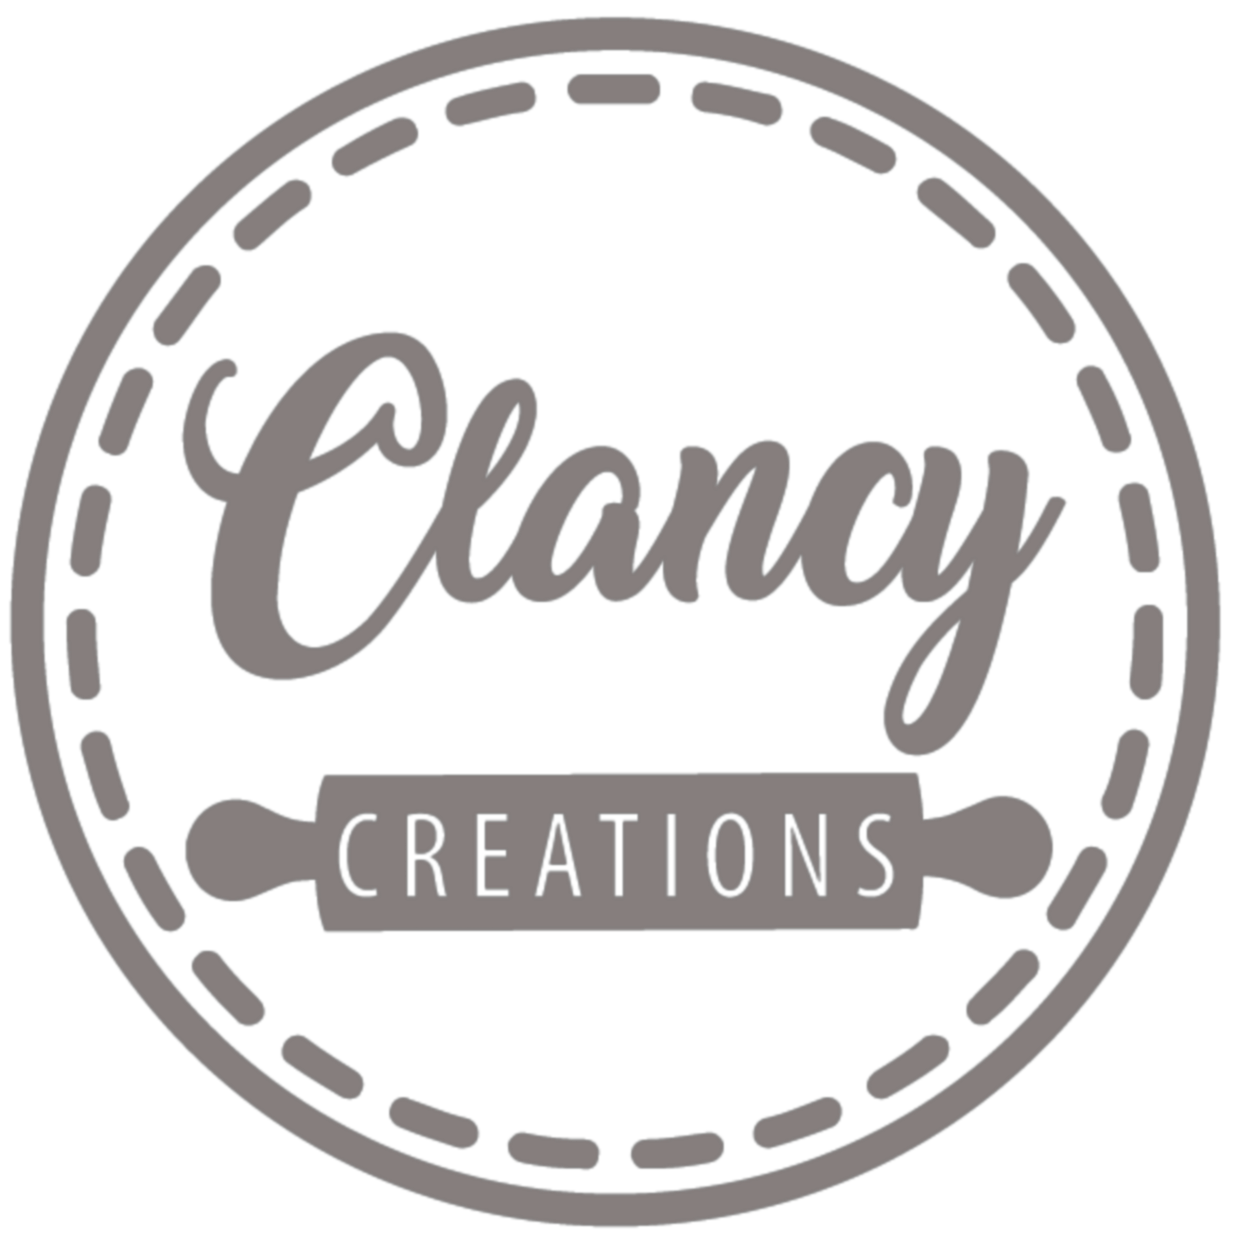 Clancy Creations